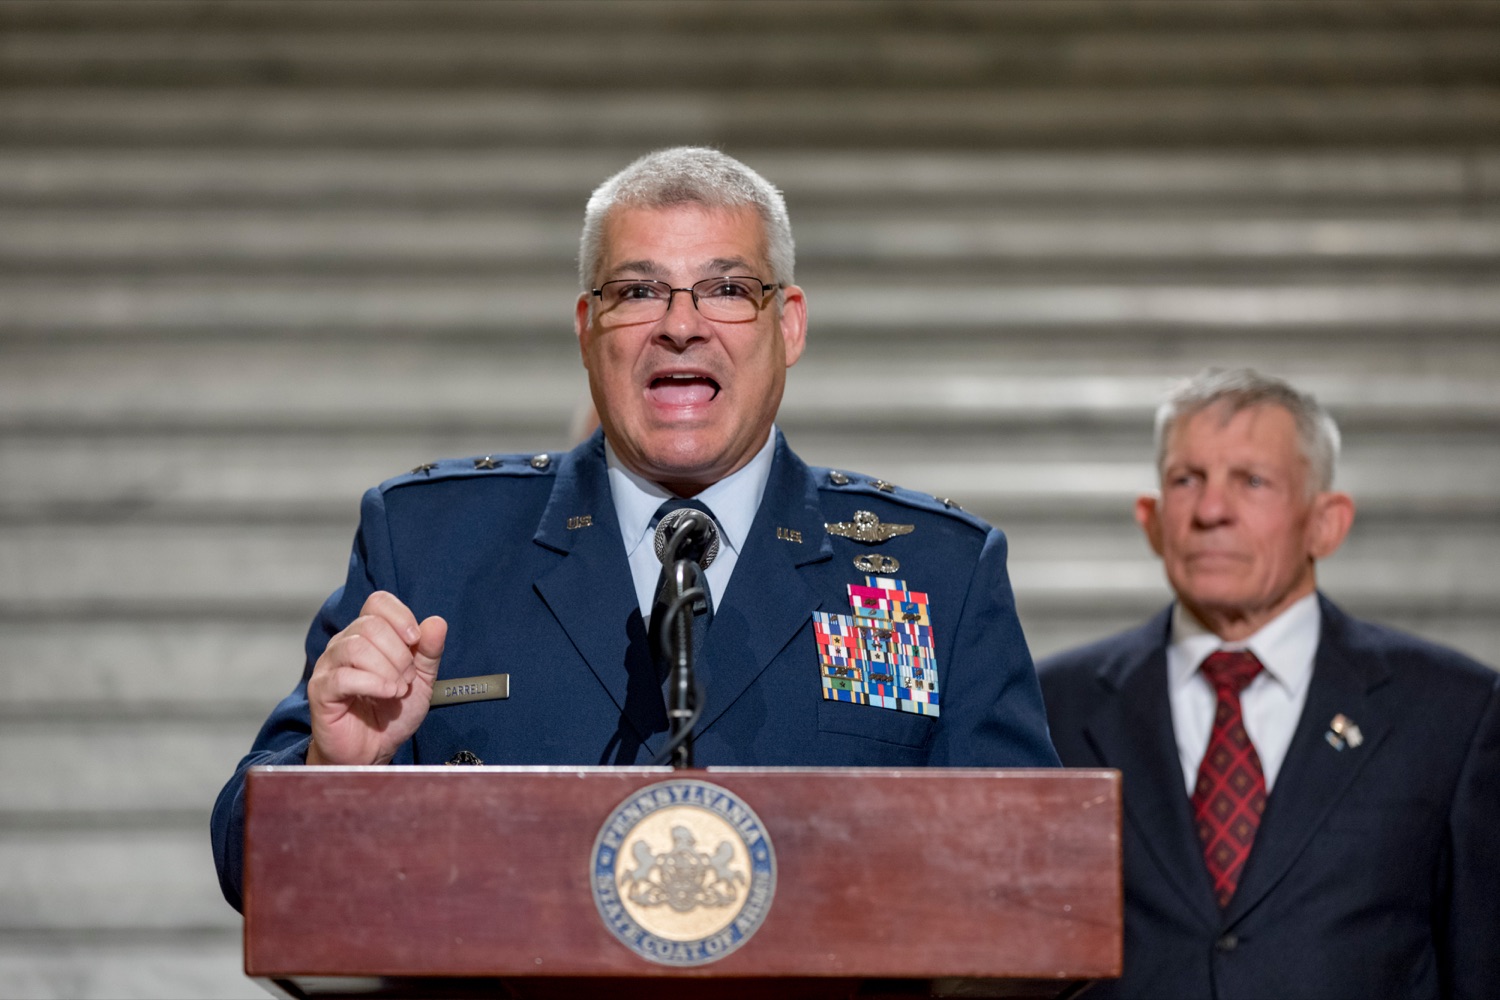 Maj. Gen. Anthony Carrelli, USAF and adjutant general of Pennsylvania, speaks during a press conference outlining how competition for qualified individuals among all employment sectors affects military recruiting efforts and warrants greater investment in our next generation inside the Capitol Rotunda on Tuesday, November 12, 2019.<br><a href="https://filesource.amperwave.net/commonwealthofpa/photo/17588_GOV_Mission_Readiness_NK_023.JPG" target="_blank">⇣ Download Photo</a>